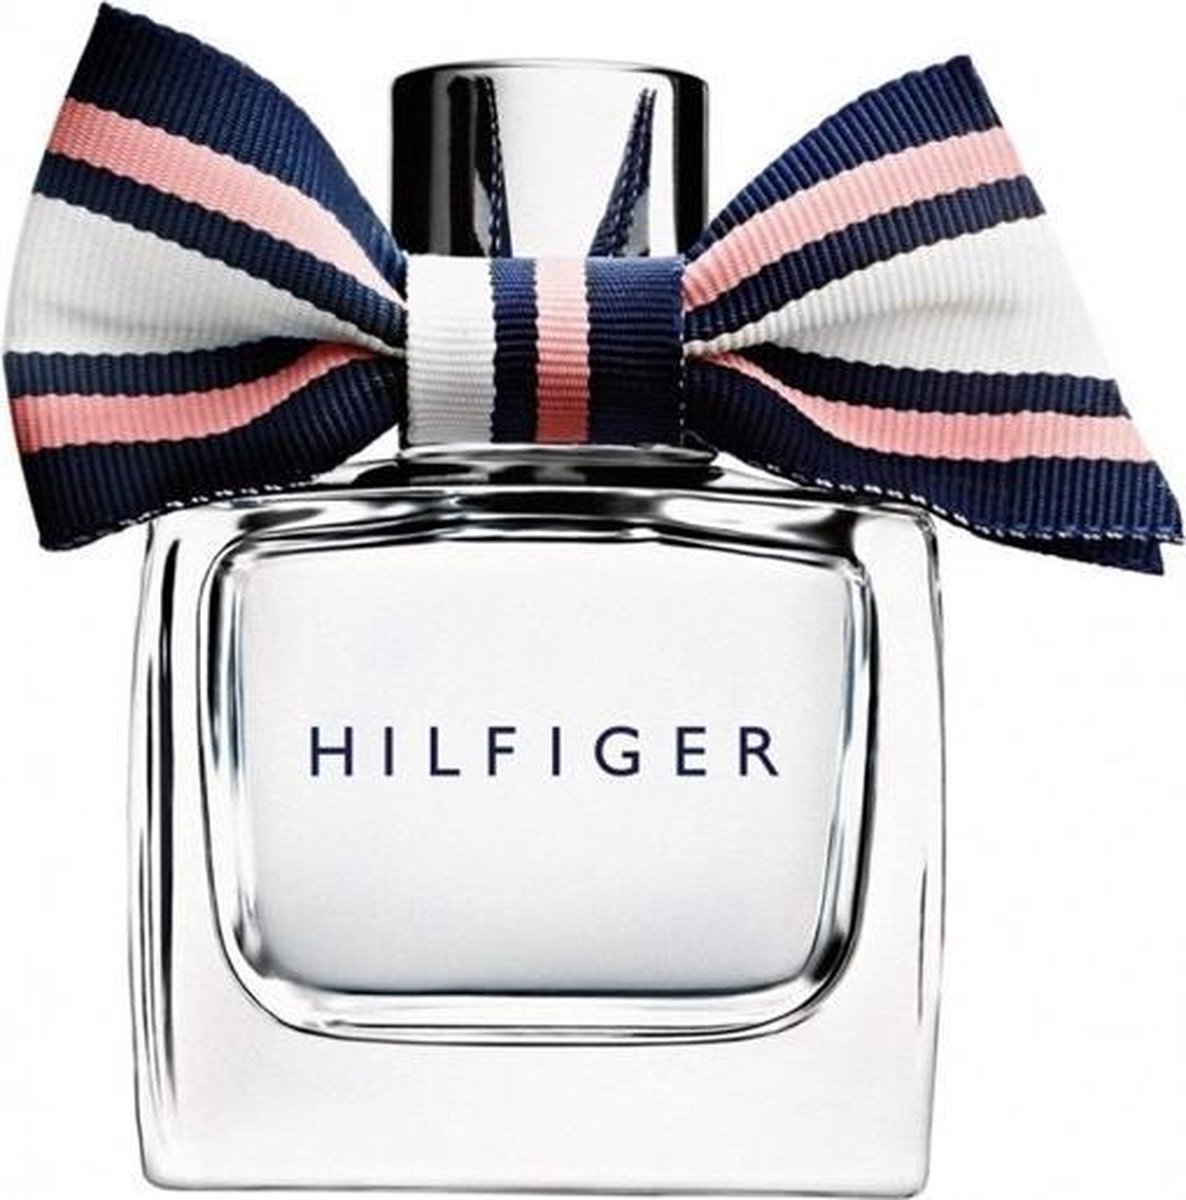 Tommy Hilfiger Peach Blossom 100ml Hot Sale, SAVE 50%.